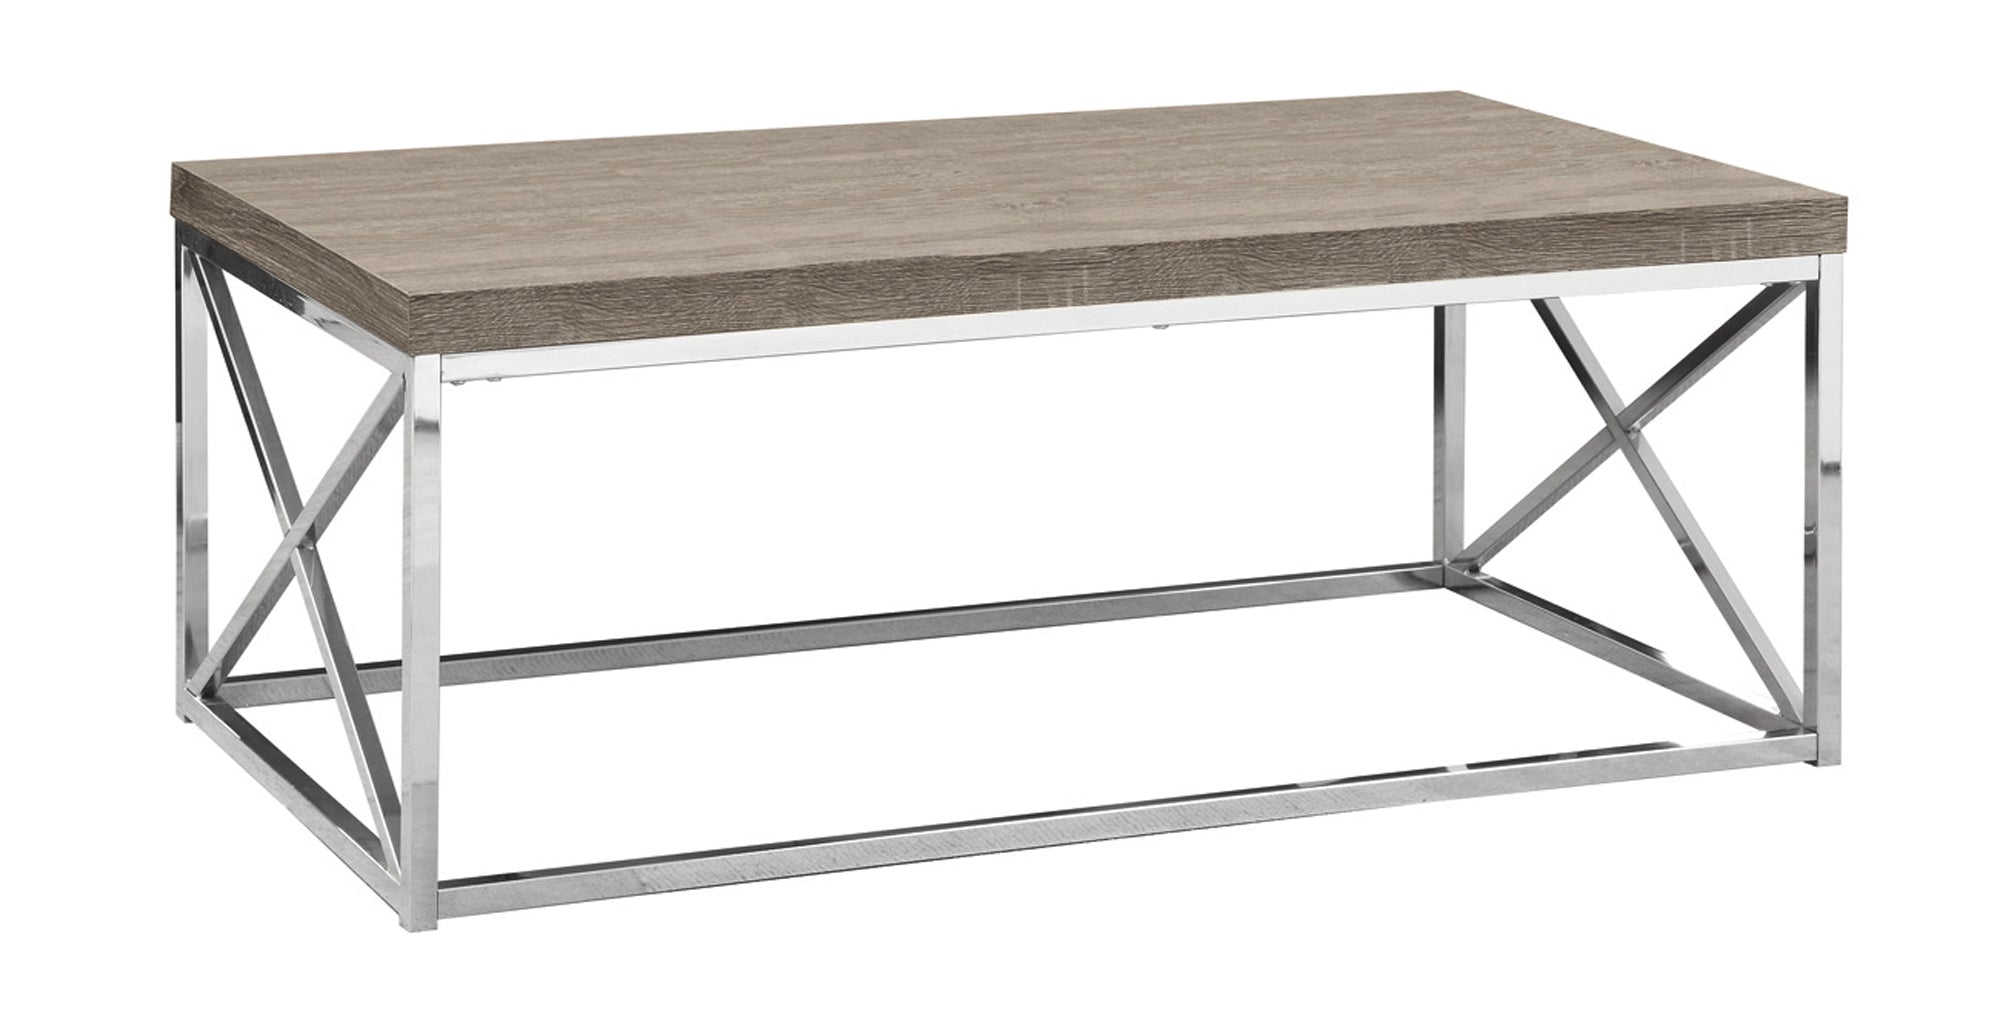 MN-933258    Coffee Table, Accent, Cocktail, Rectangular, Living Room, Metal Frame, Laminate, Dark Taupe, Chrome, Contemporary, Modern